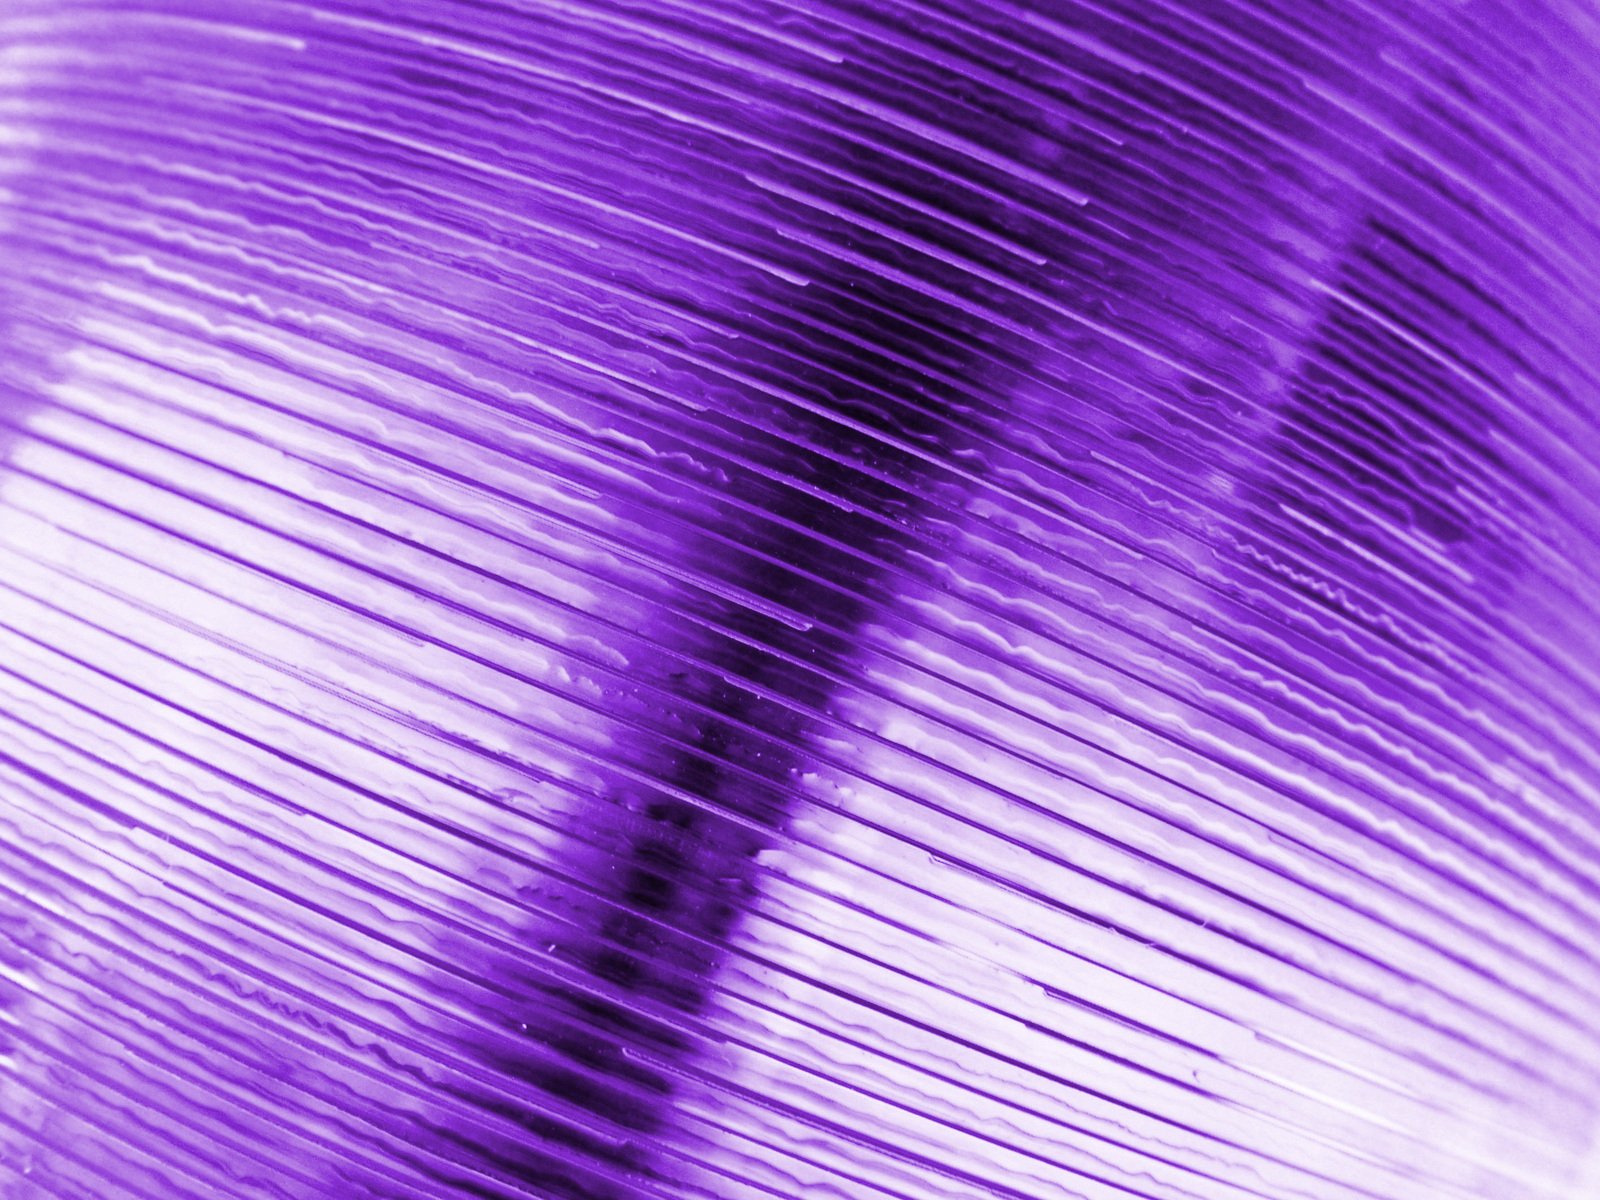 a blurred purple background with lines and shapes